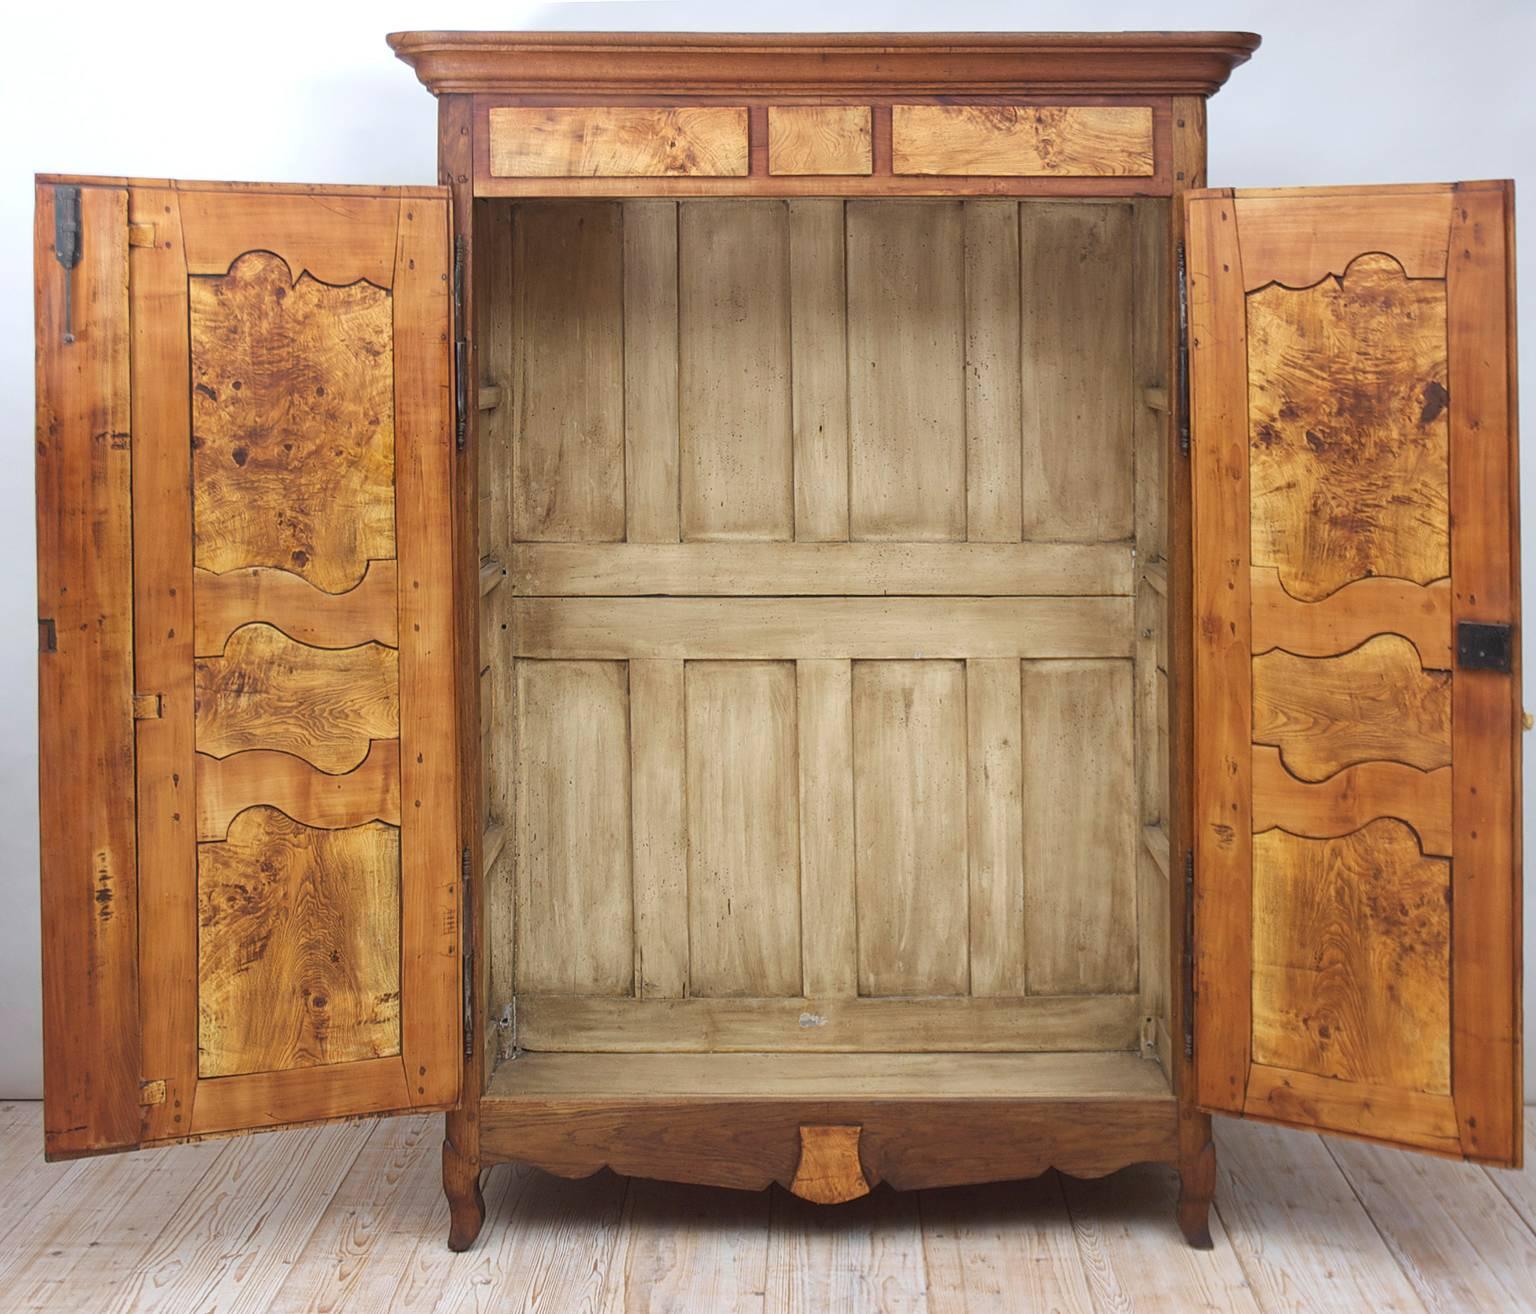 Mid-19th Century 19th Century Antique French Armoire in Walnut & Cherry with Burl Olive Ash Panel